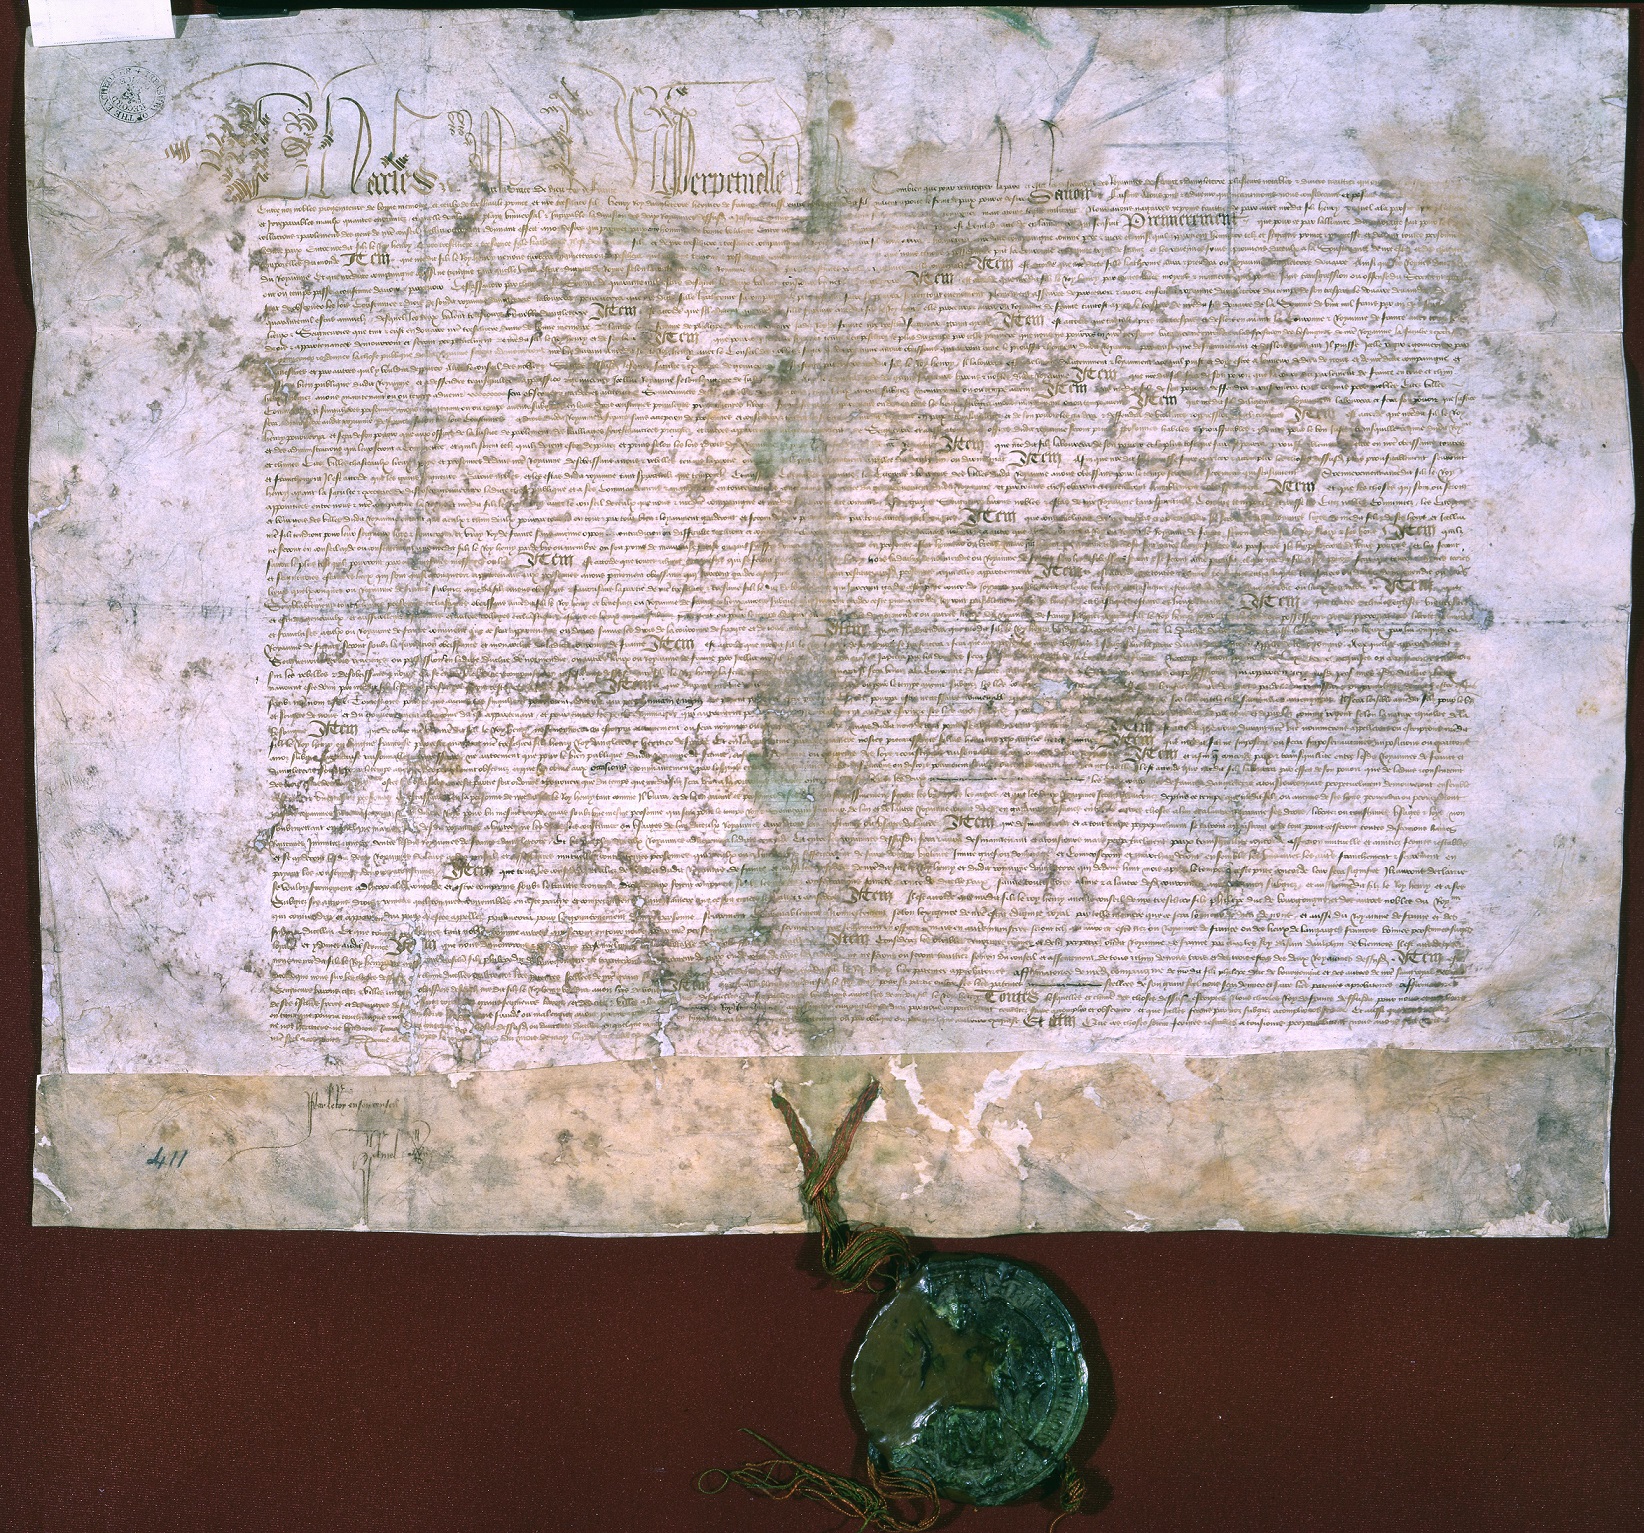 The 600th anniversary of the Treaty of Troyes